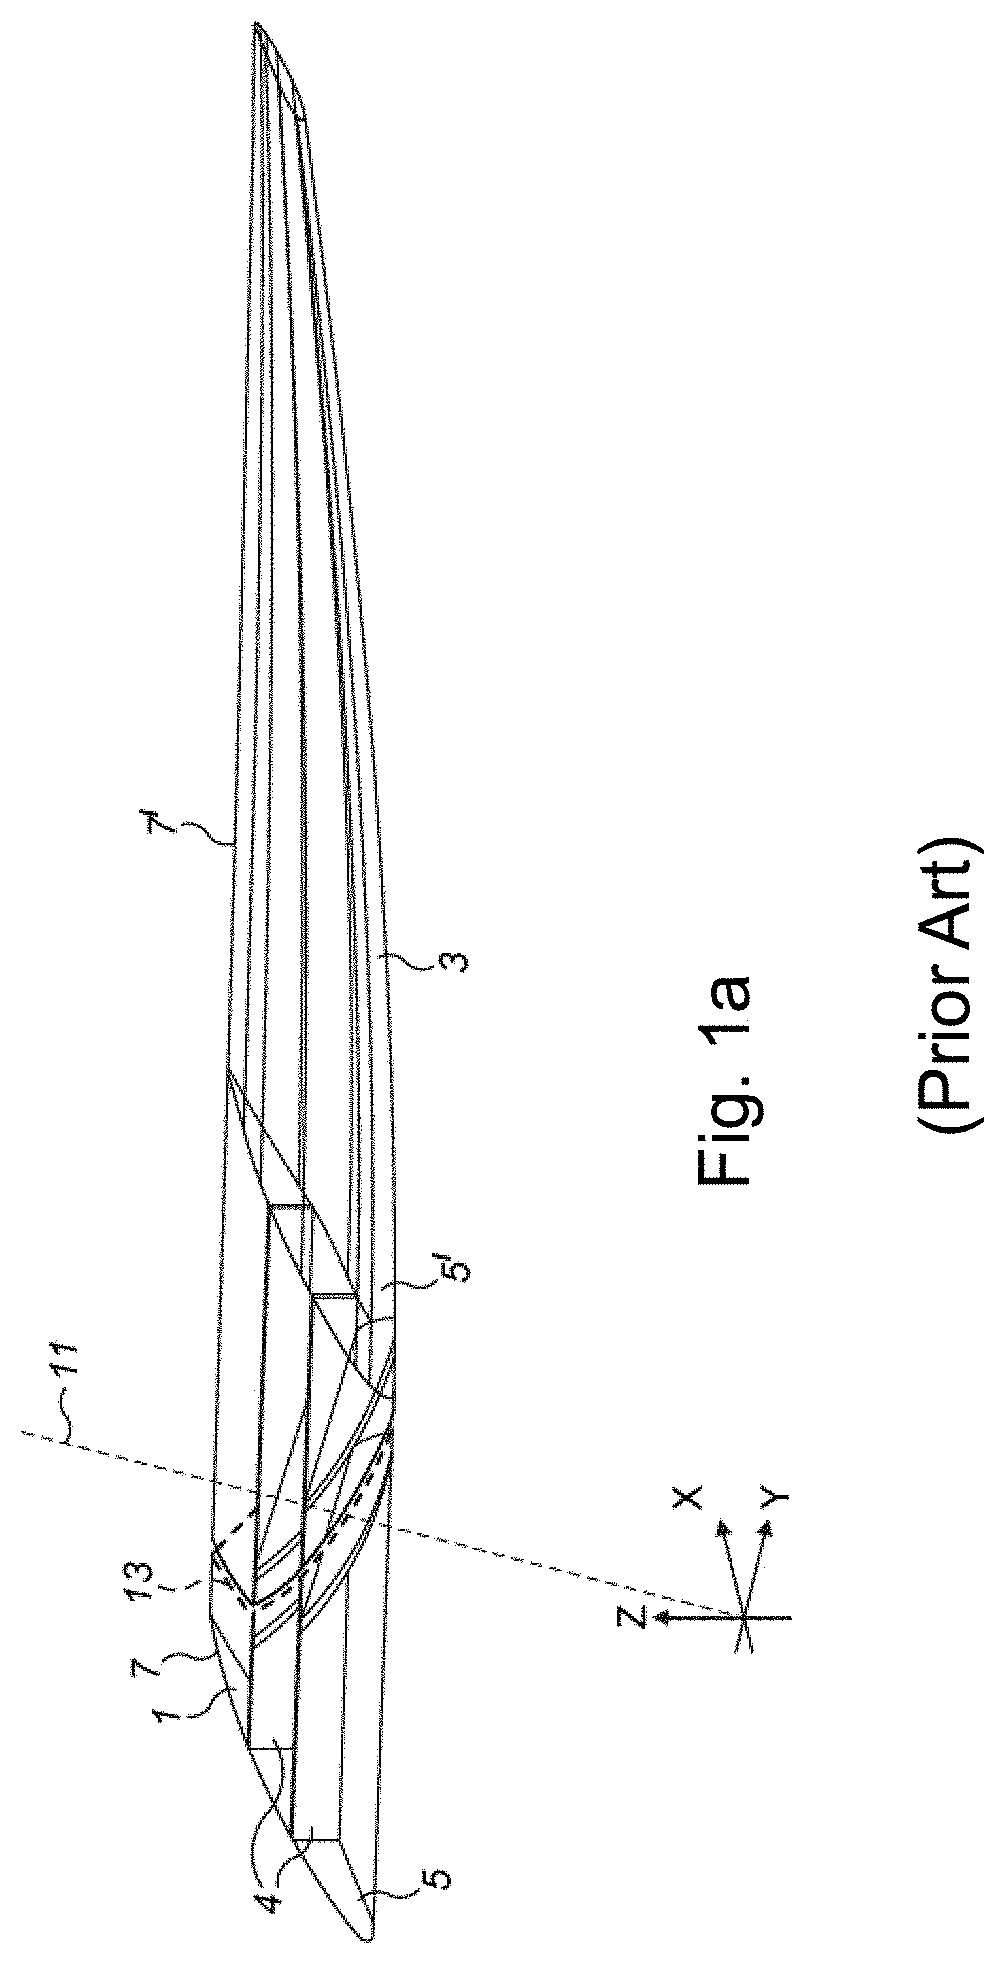 Arrangement of ribs at an interface between an outer end of a wing and a moveable wing tip device